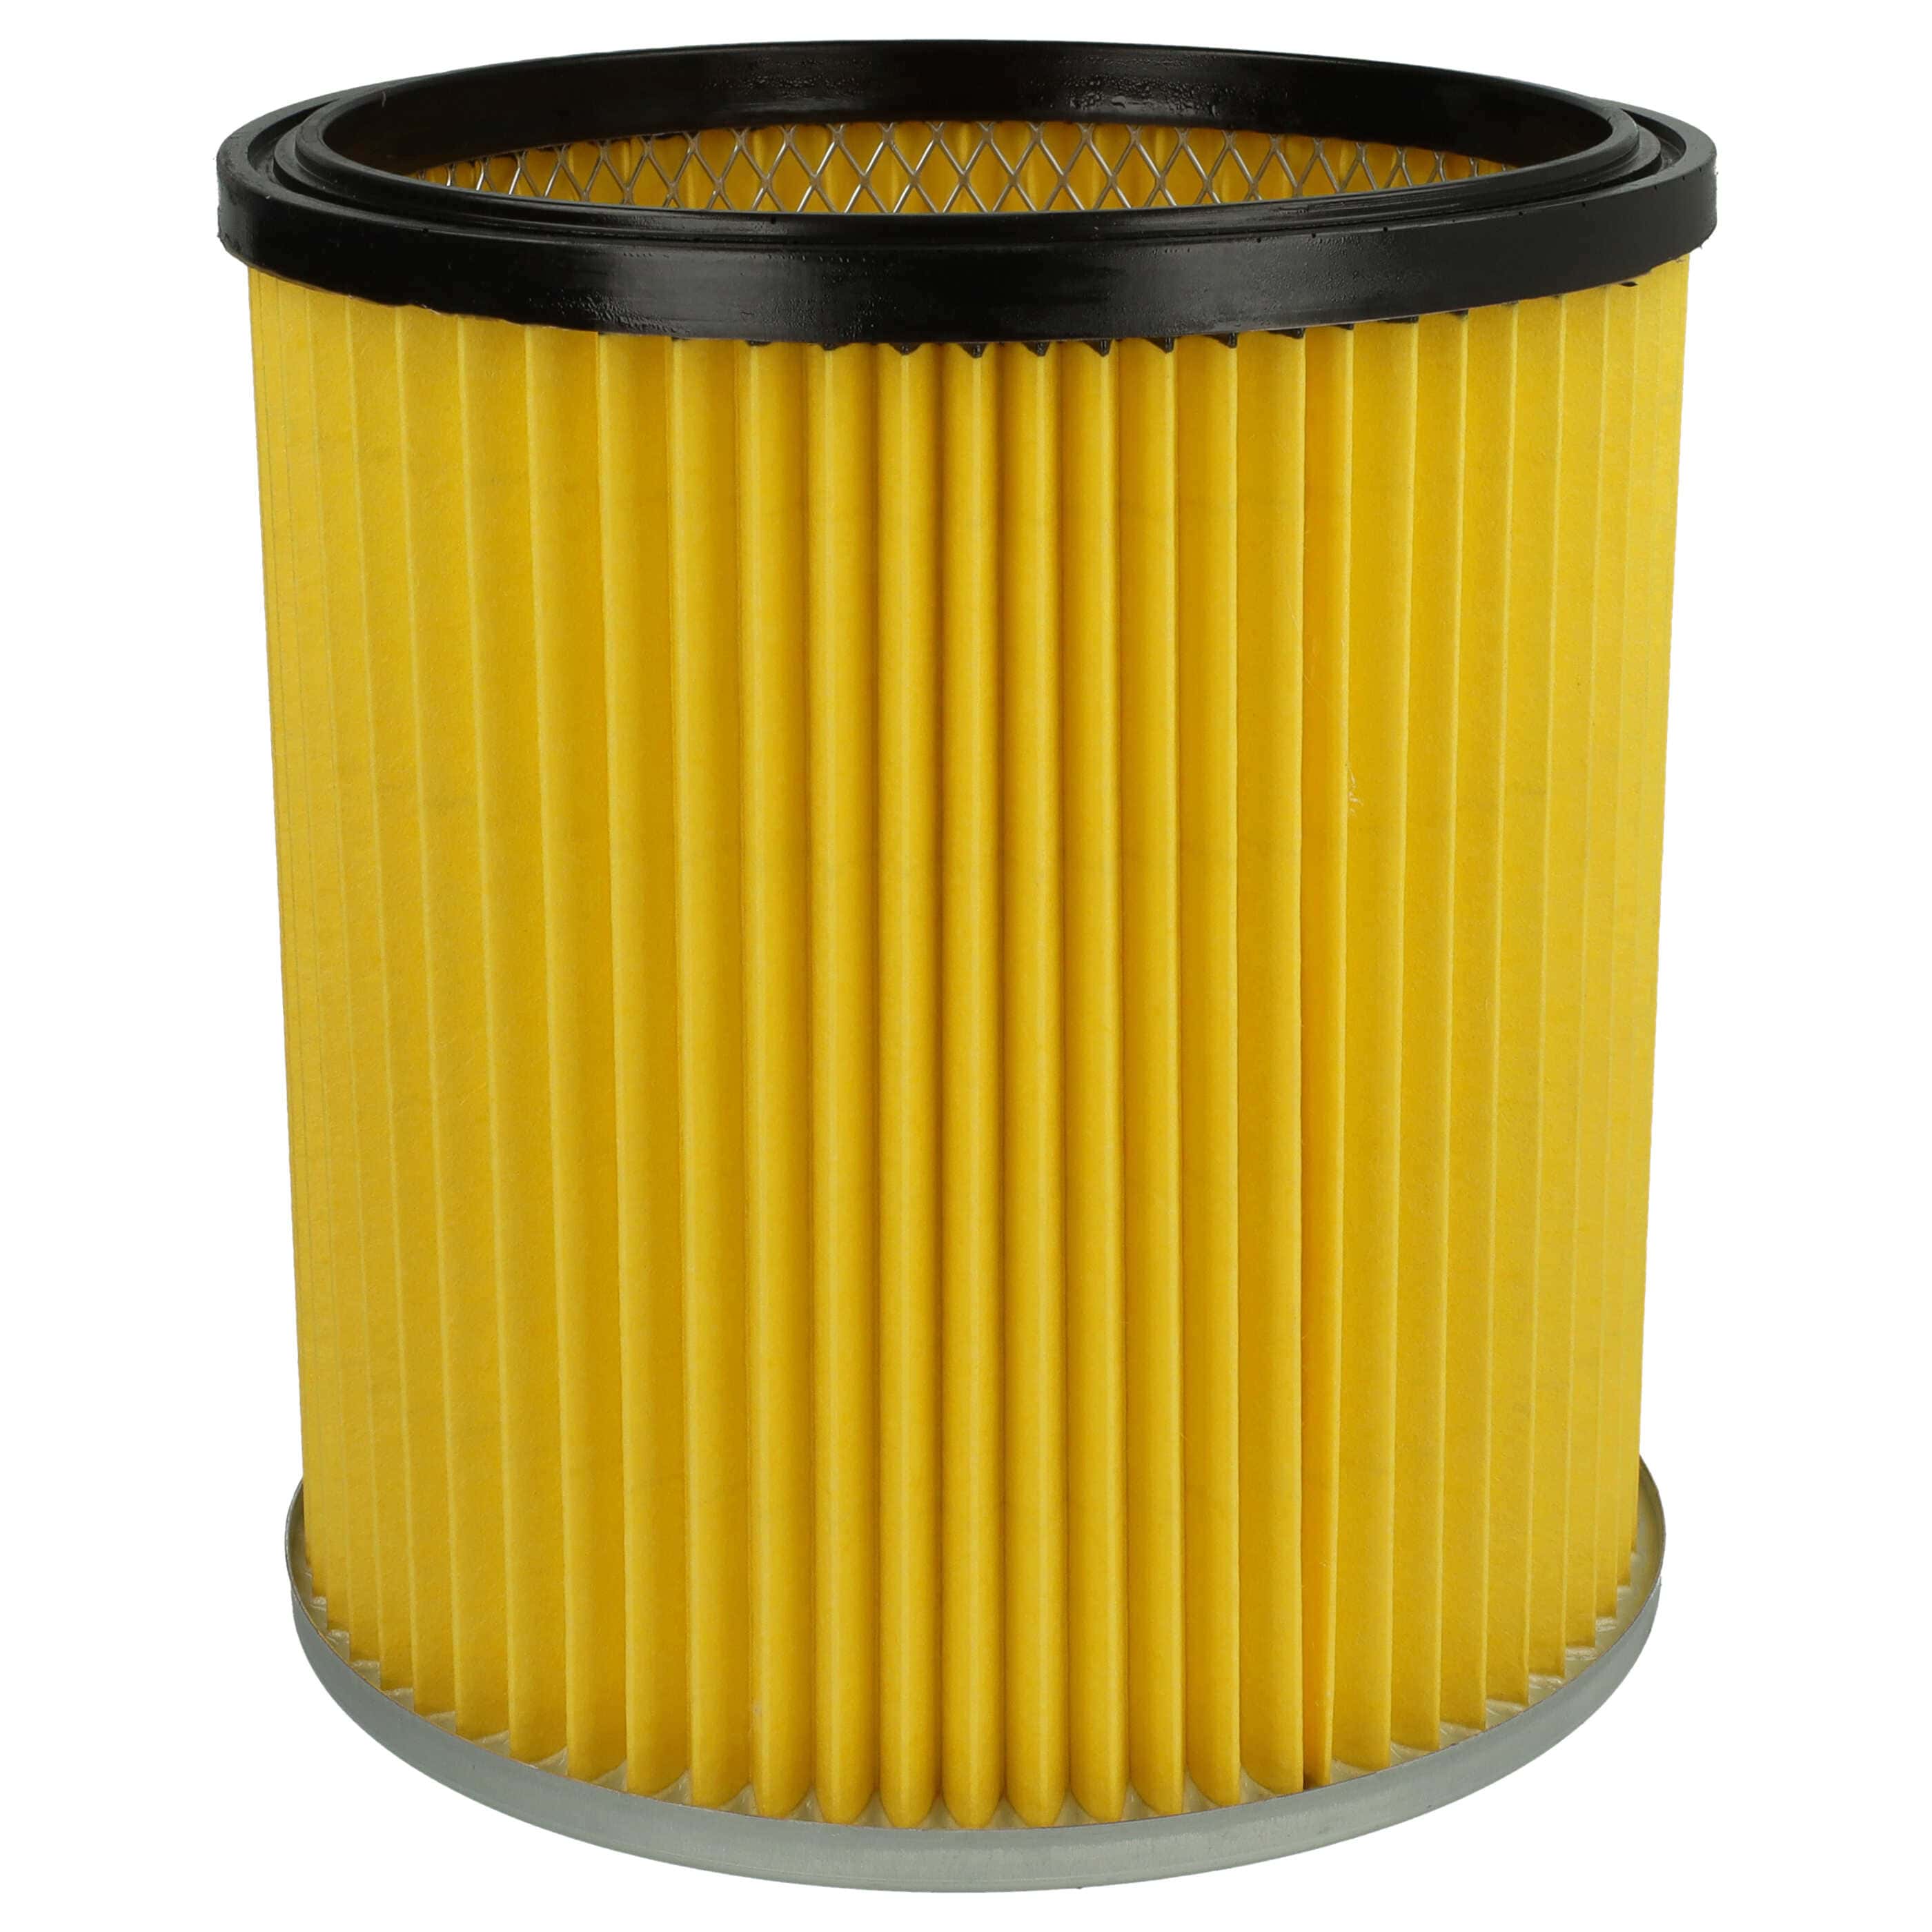 1x cartridge filter replaces Kärcher 6.414-354.0, 6.414-335.0 for DewaltVacuum Cleaner, yellow